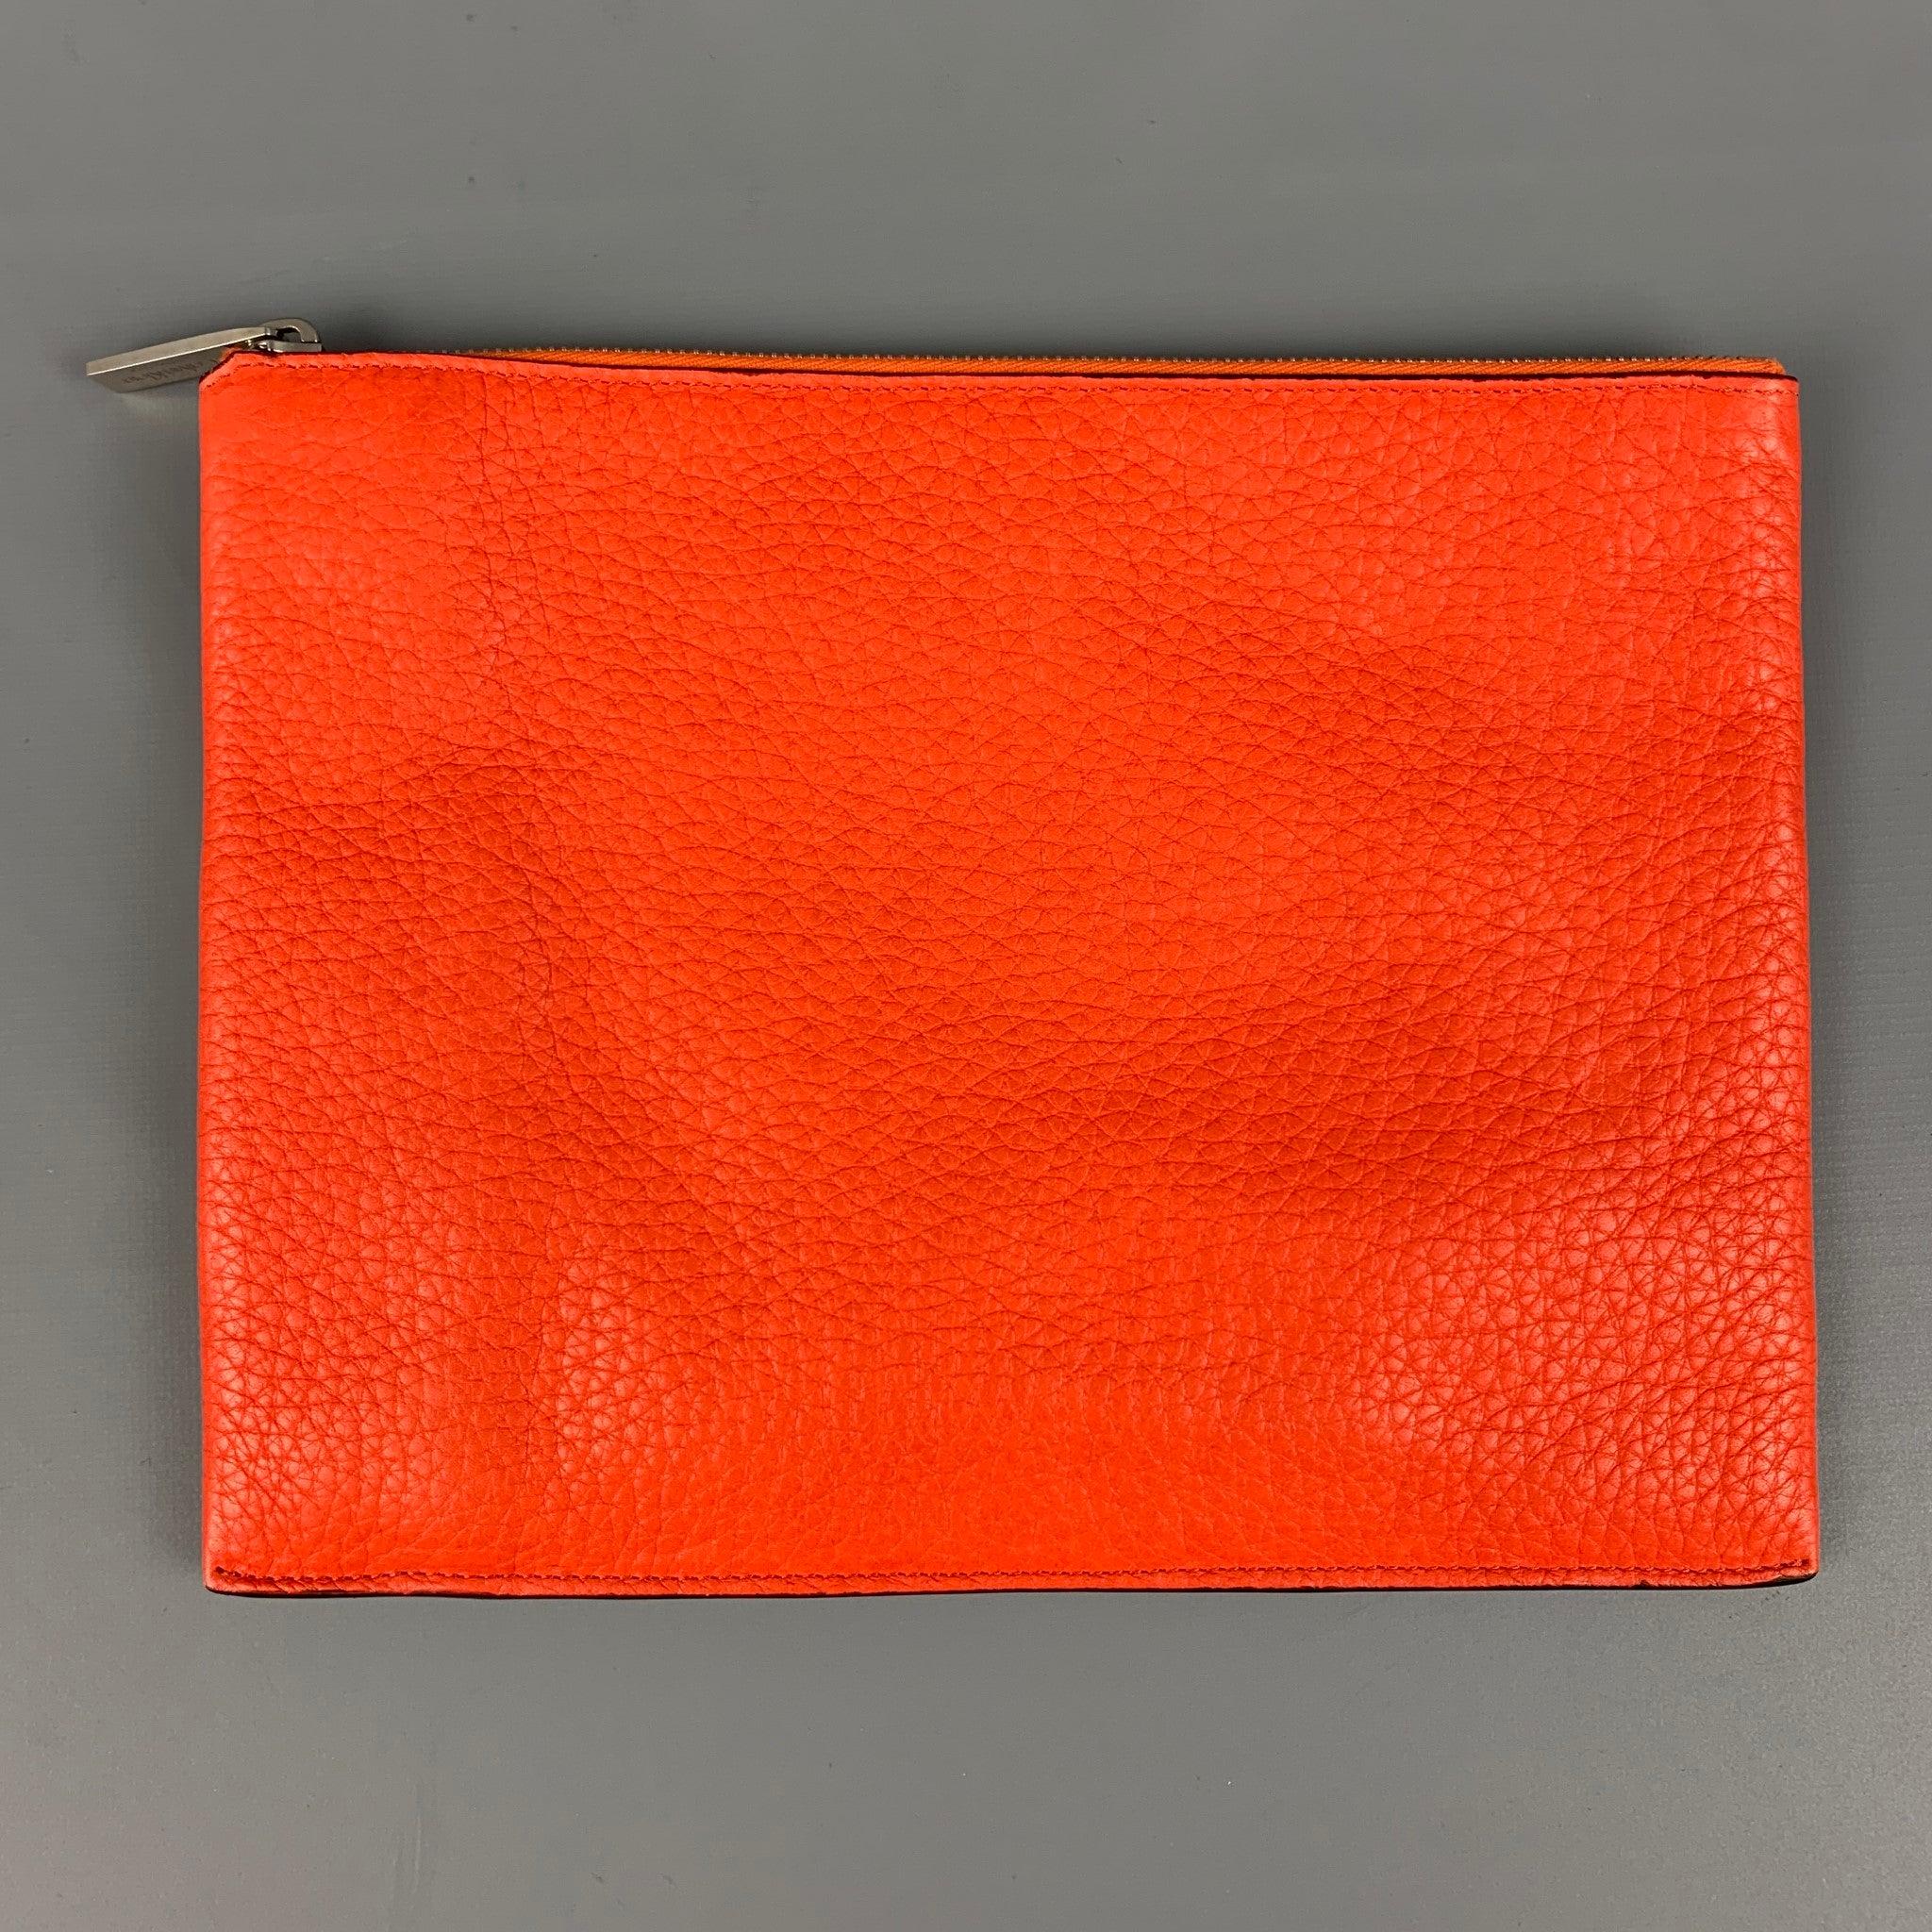 CALVIN KLEIN COLLECTION pouch bag comes in a orange textured leather featuring a top zipper closure. Made in Italy.
Very Good
Pre-Owned Condition. 

Measurements: 
  Length: 10.5 inches  Height:
8 inches 
  
  
 
Reference: 118712
Category: Bags &